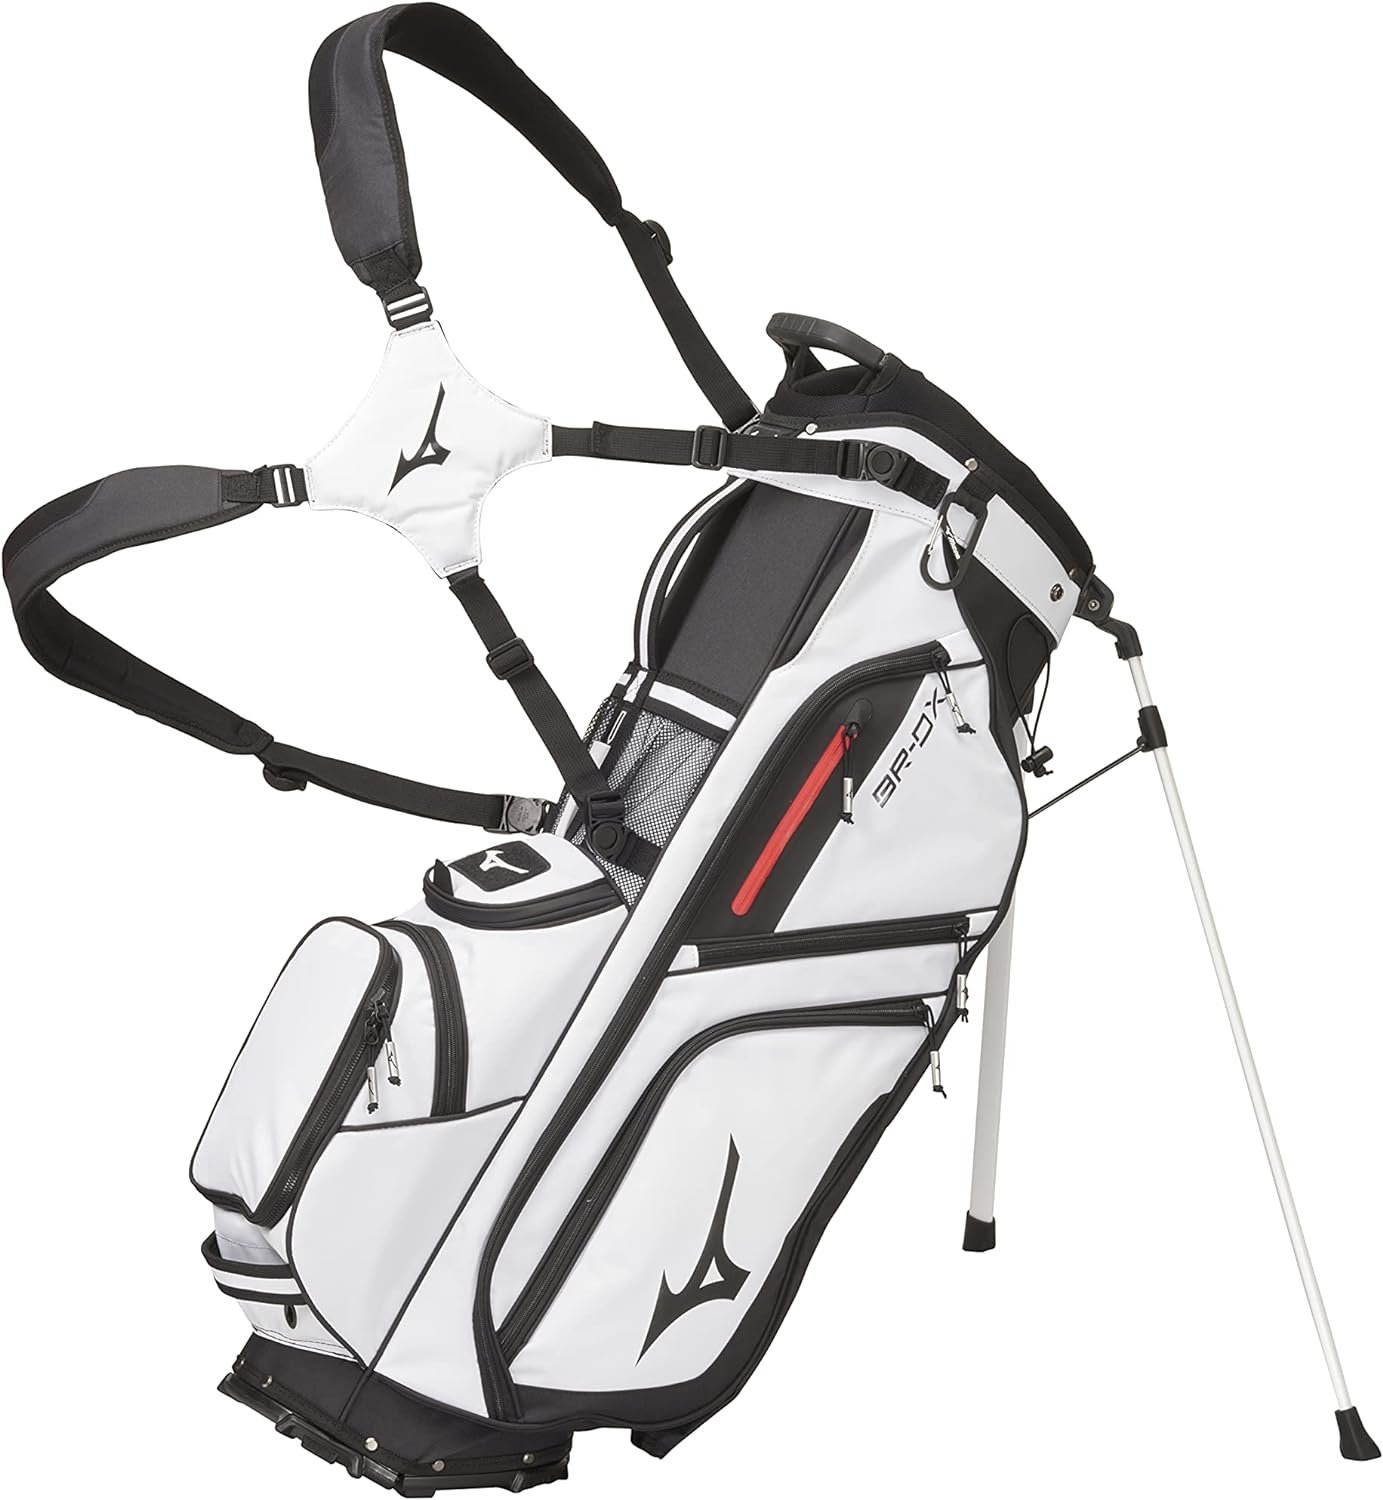 Mizuno BR-DX 14-Way Hybrid Golf Stand Bag | 14 Way Top Cuff | Full Length Dividers| Dual Shoulder Straps | Full Length Stand Legs | Large Insulated Cooler